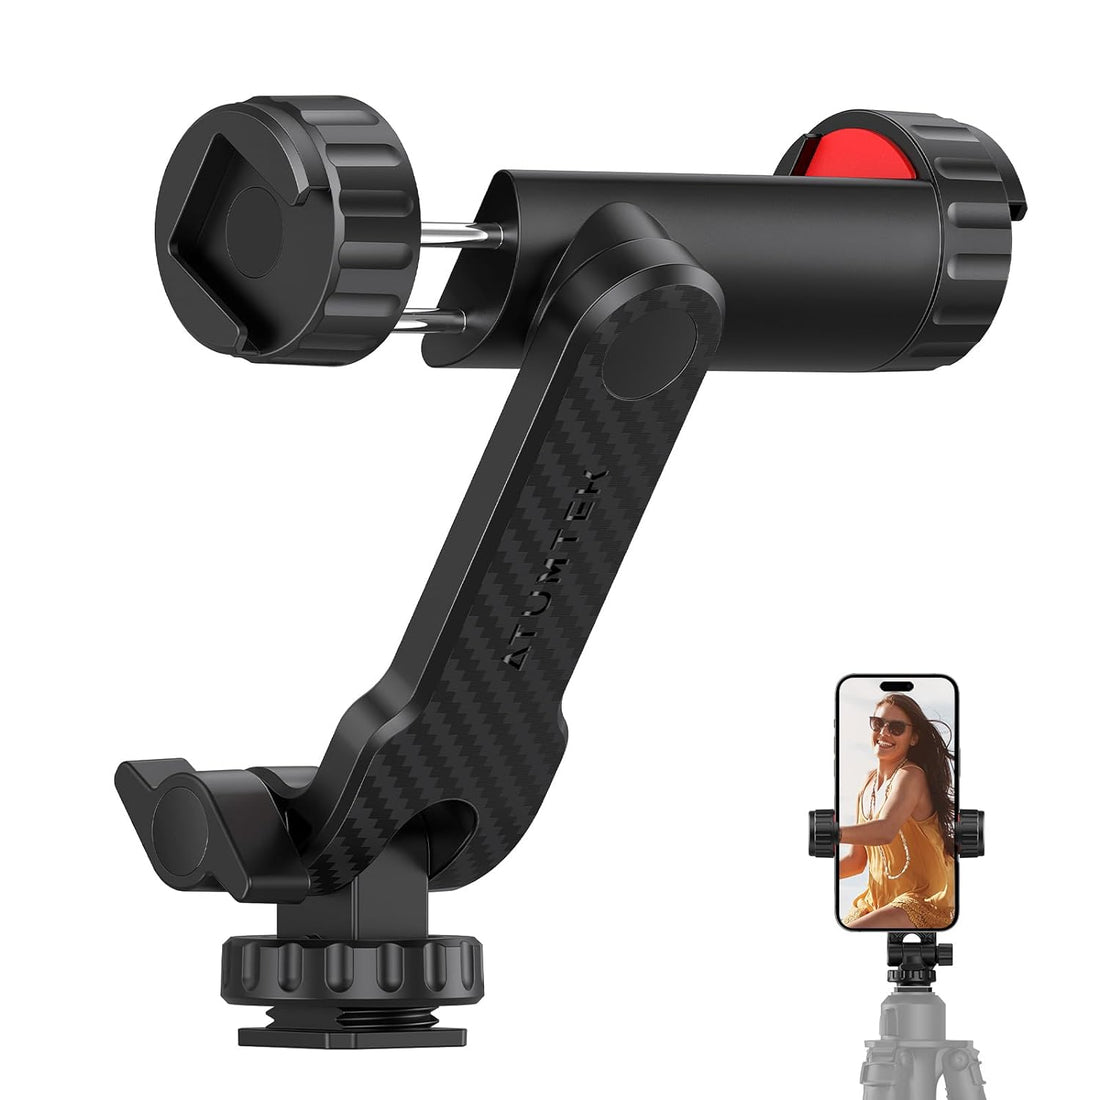 ATUMTEK Phone Tripod Mount, Universal Smartphone Mount Adapter with 2 Cold Shoe and 1/4" Standard Screw, 360° Rotates and 180° Tilts Adjustable Cell Phone Clamp Holder for Perfect Mobile Photography